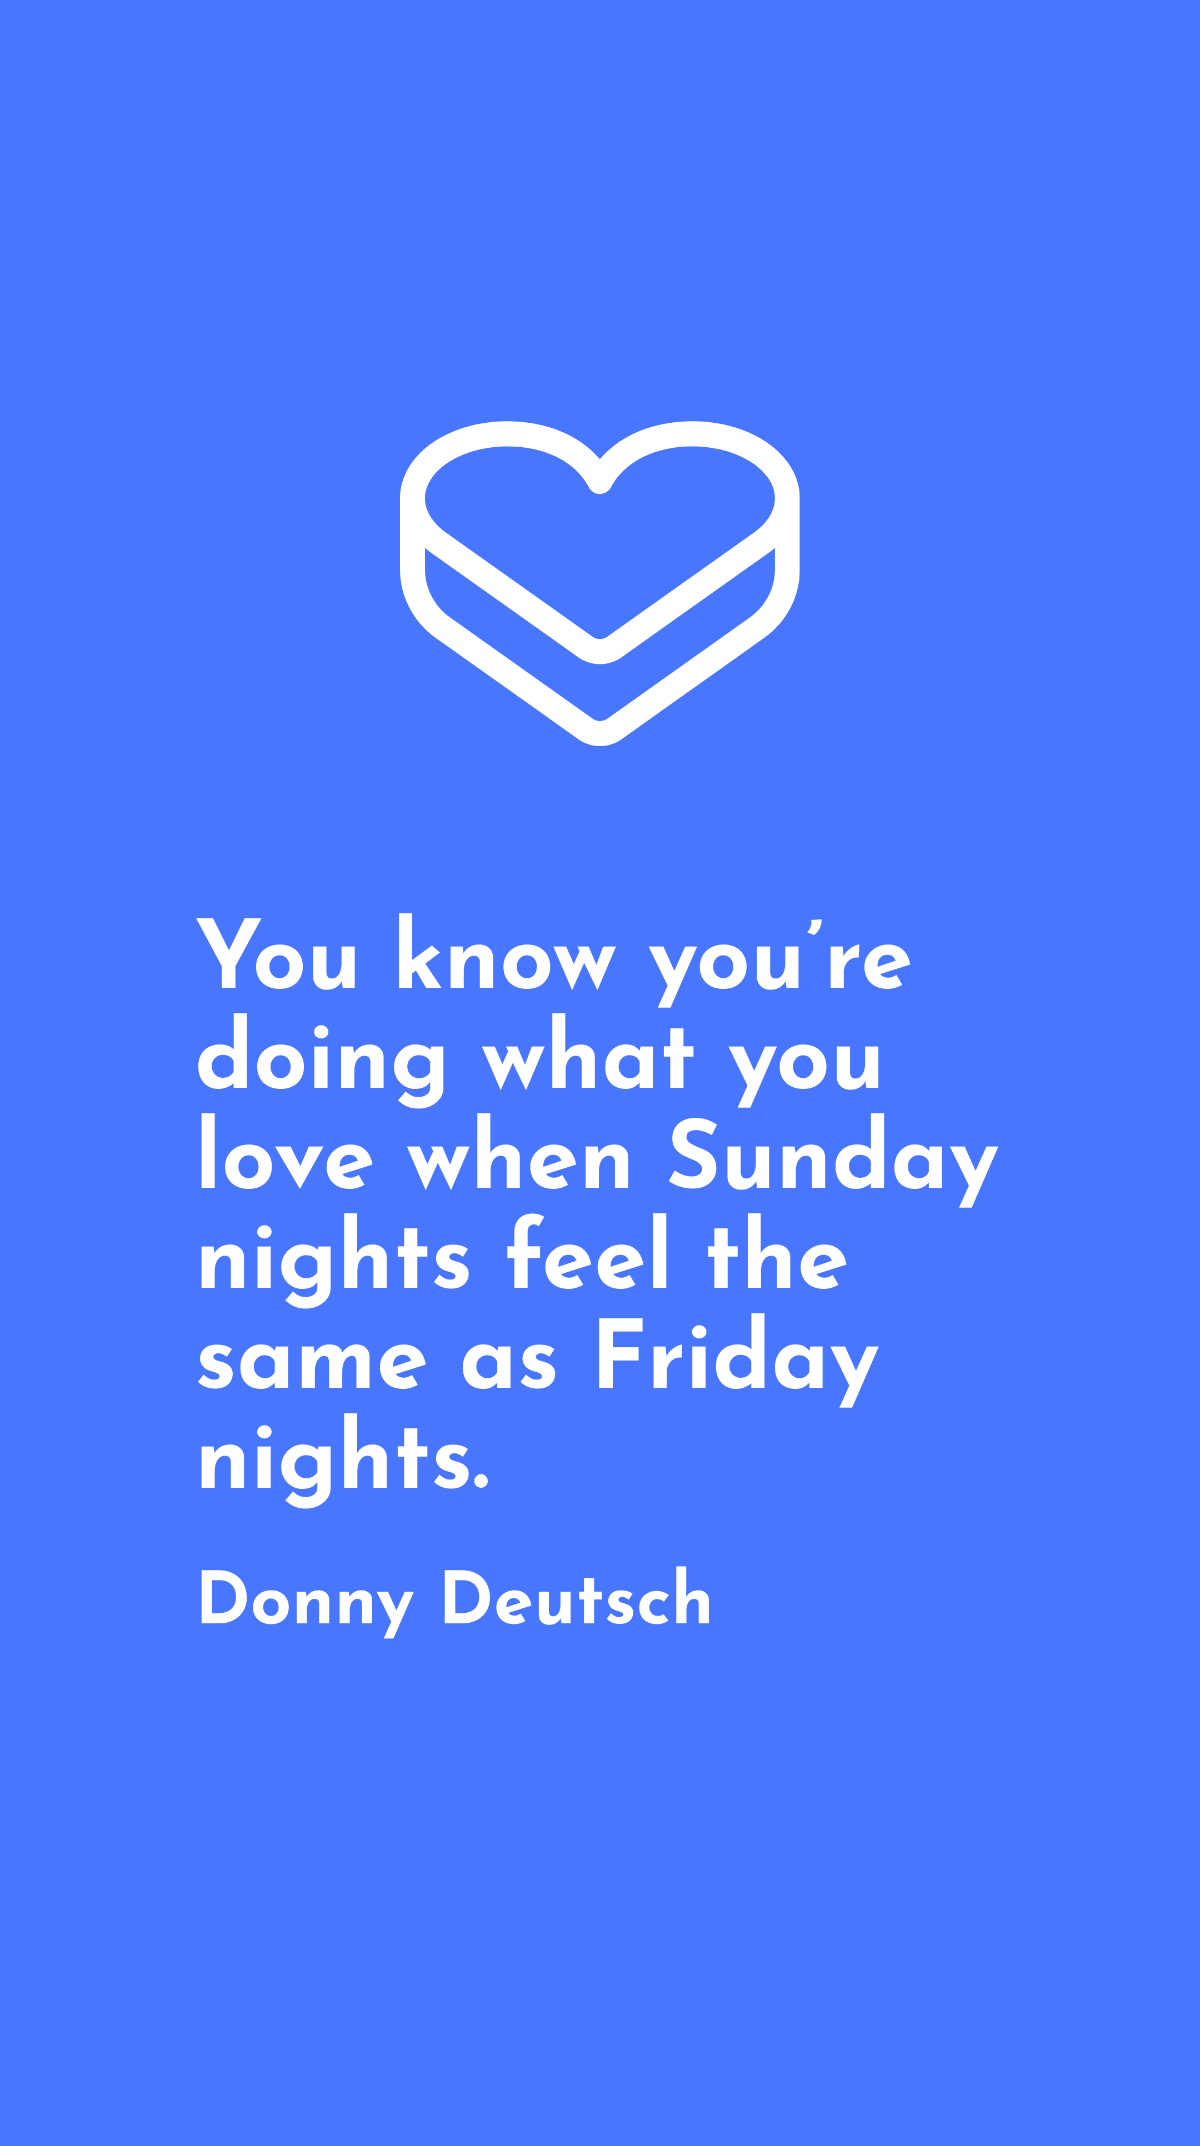 Free Donny Deutsch - You know you’re doing what you love when Sunday nights feel the same as Friday nights. Template